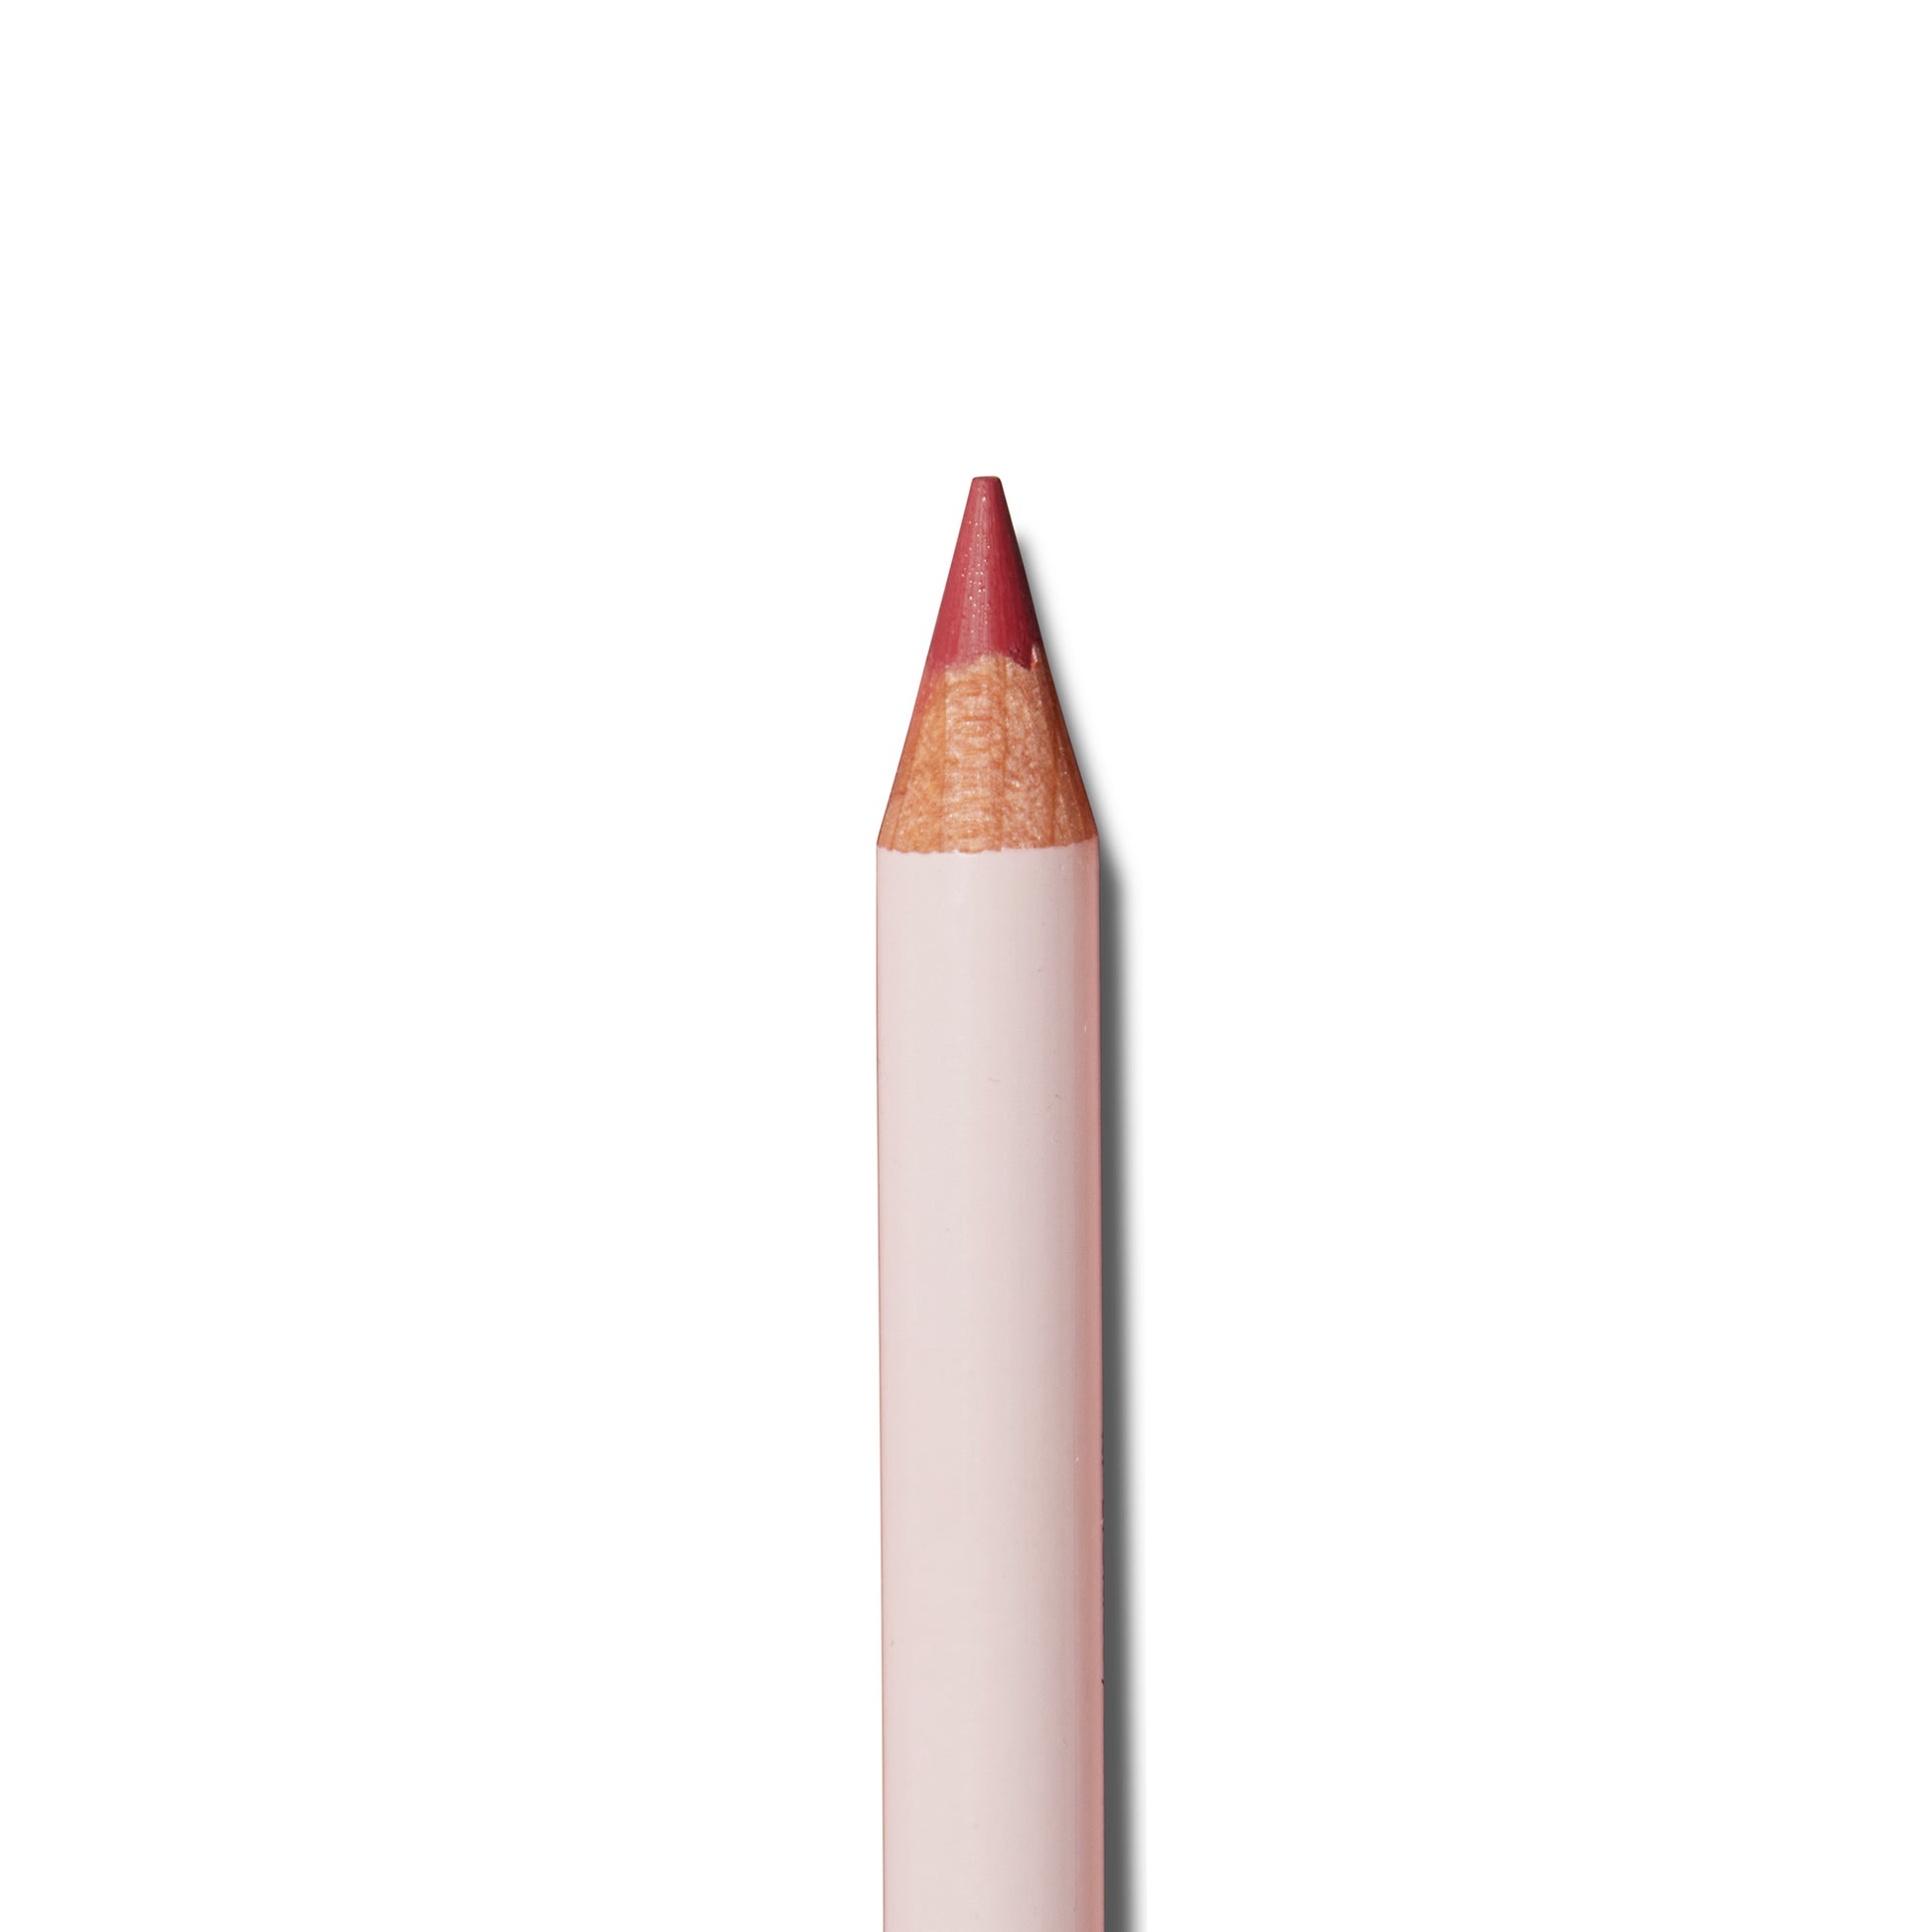 A close up of the tip of the Monika Blunder Hot Line Lipliner Pencil in Nancy.